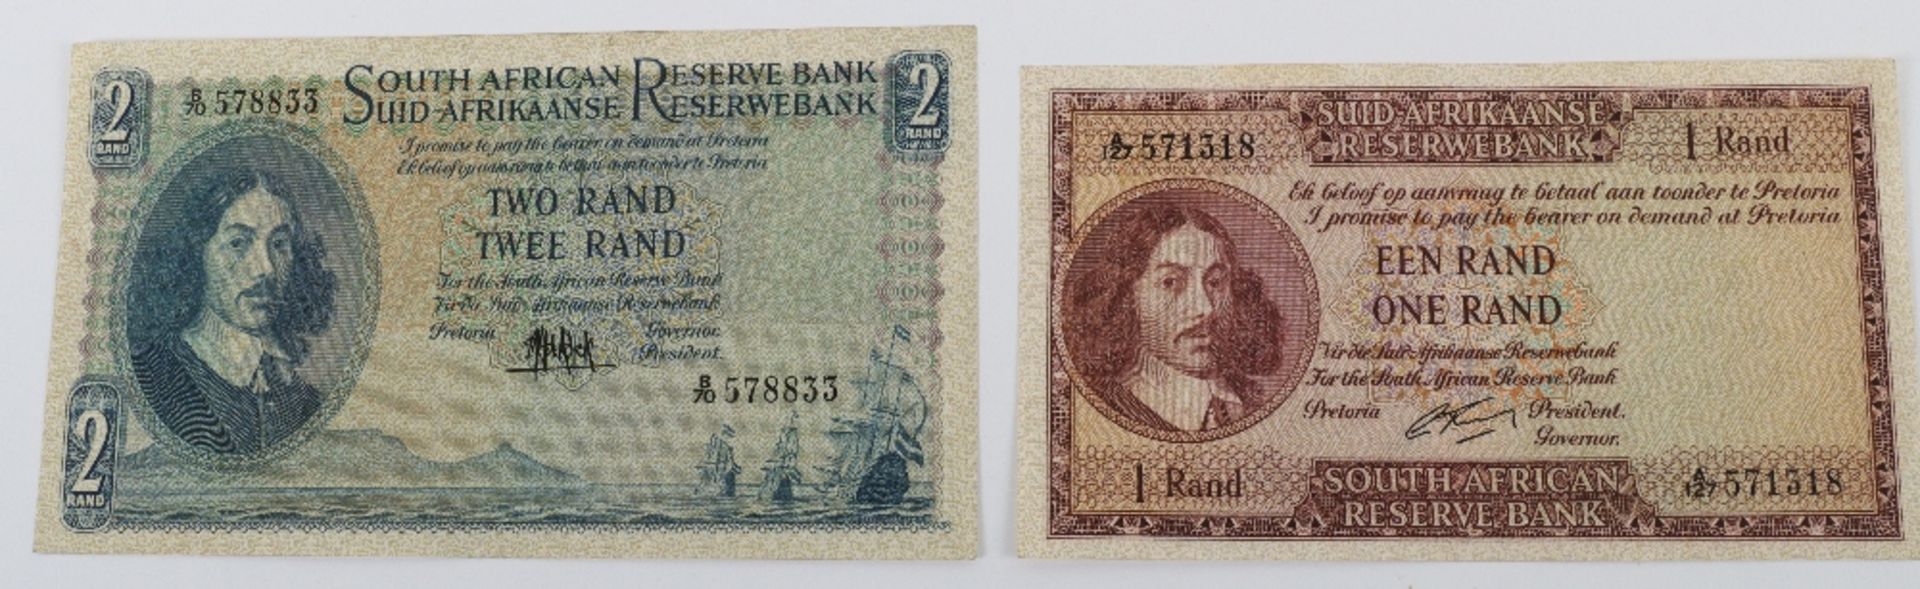 South Africa, ‘Bilingual’ Rands, 1961, One and Two Rand